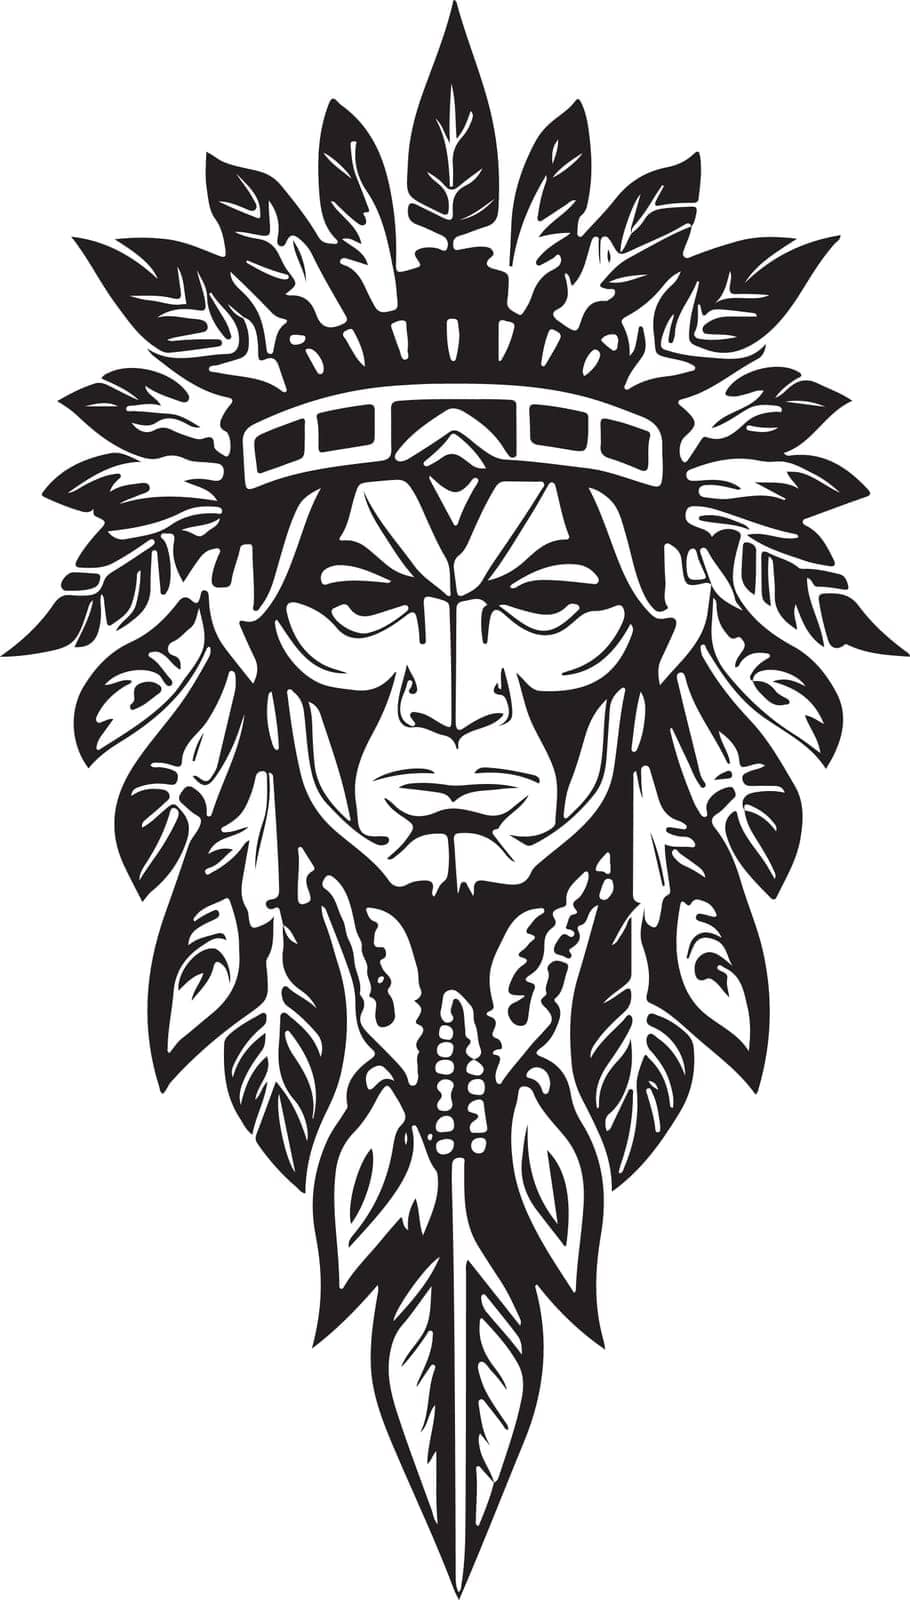 A Beautiful iconic Native American chief in a black and white vector illustration, Suitable for logo design, tattoo design or print on demand by luisalfonso89